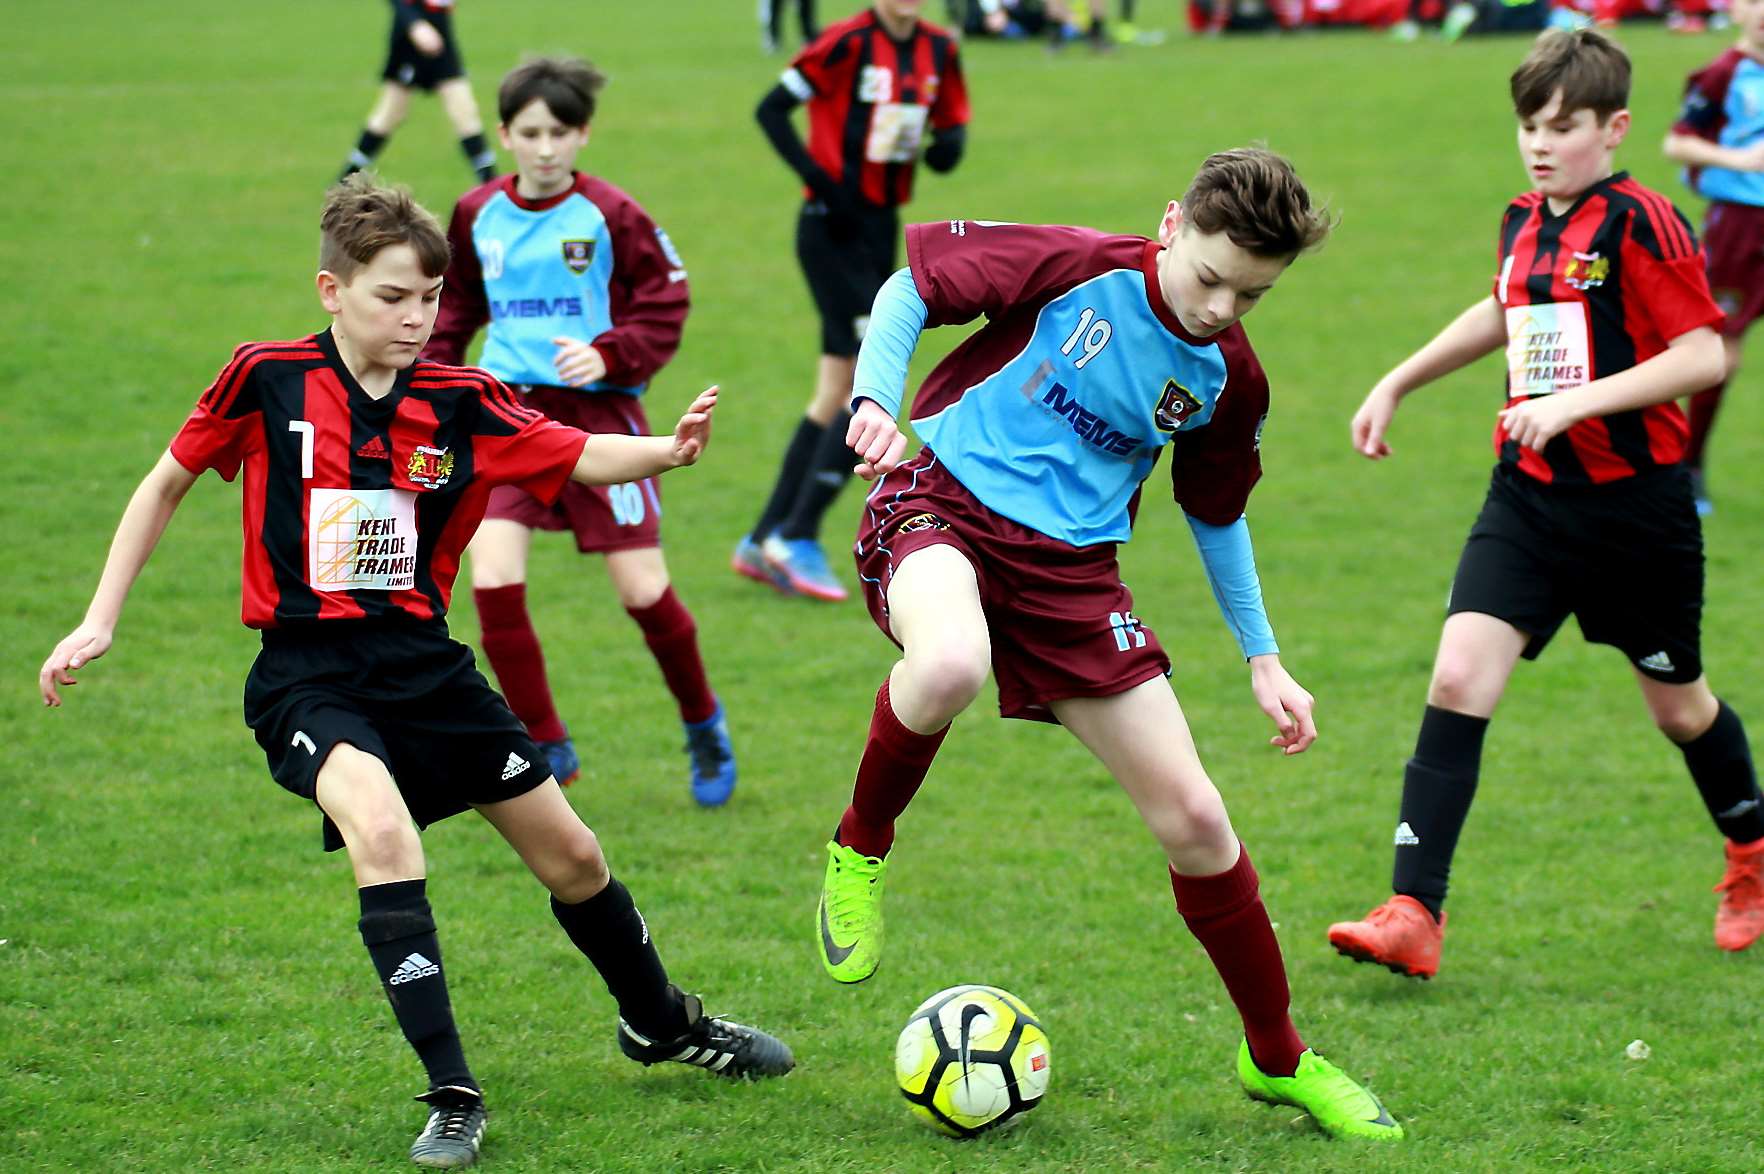 Woodcoombe Youth under-13s try some trickery against Wigmore Youth in Division 1 Picture: Phil Lee